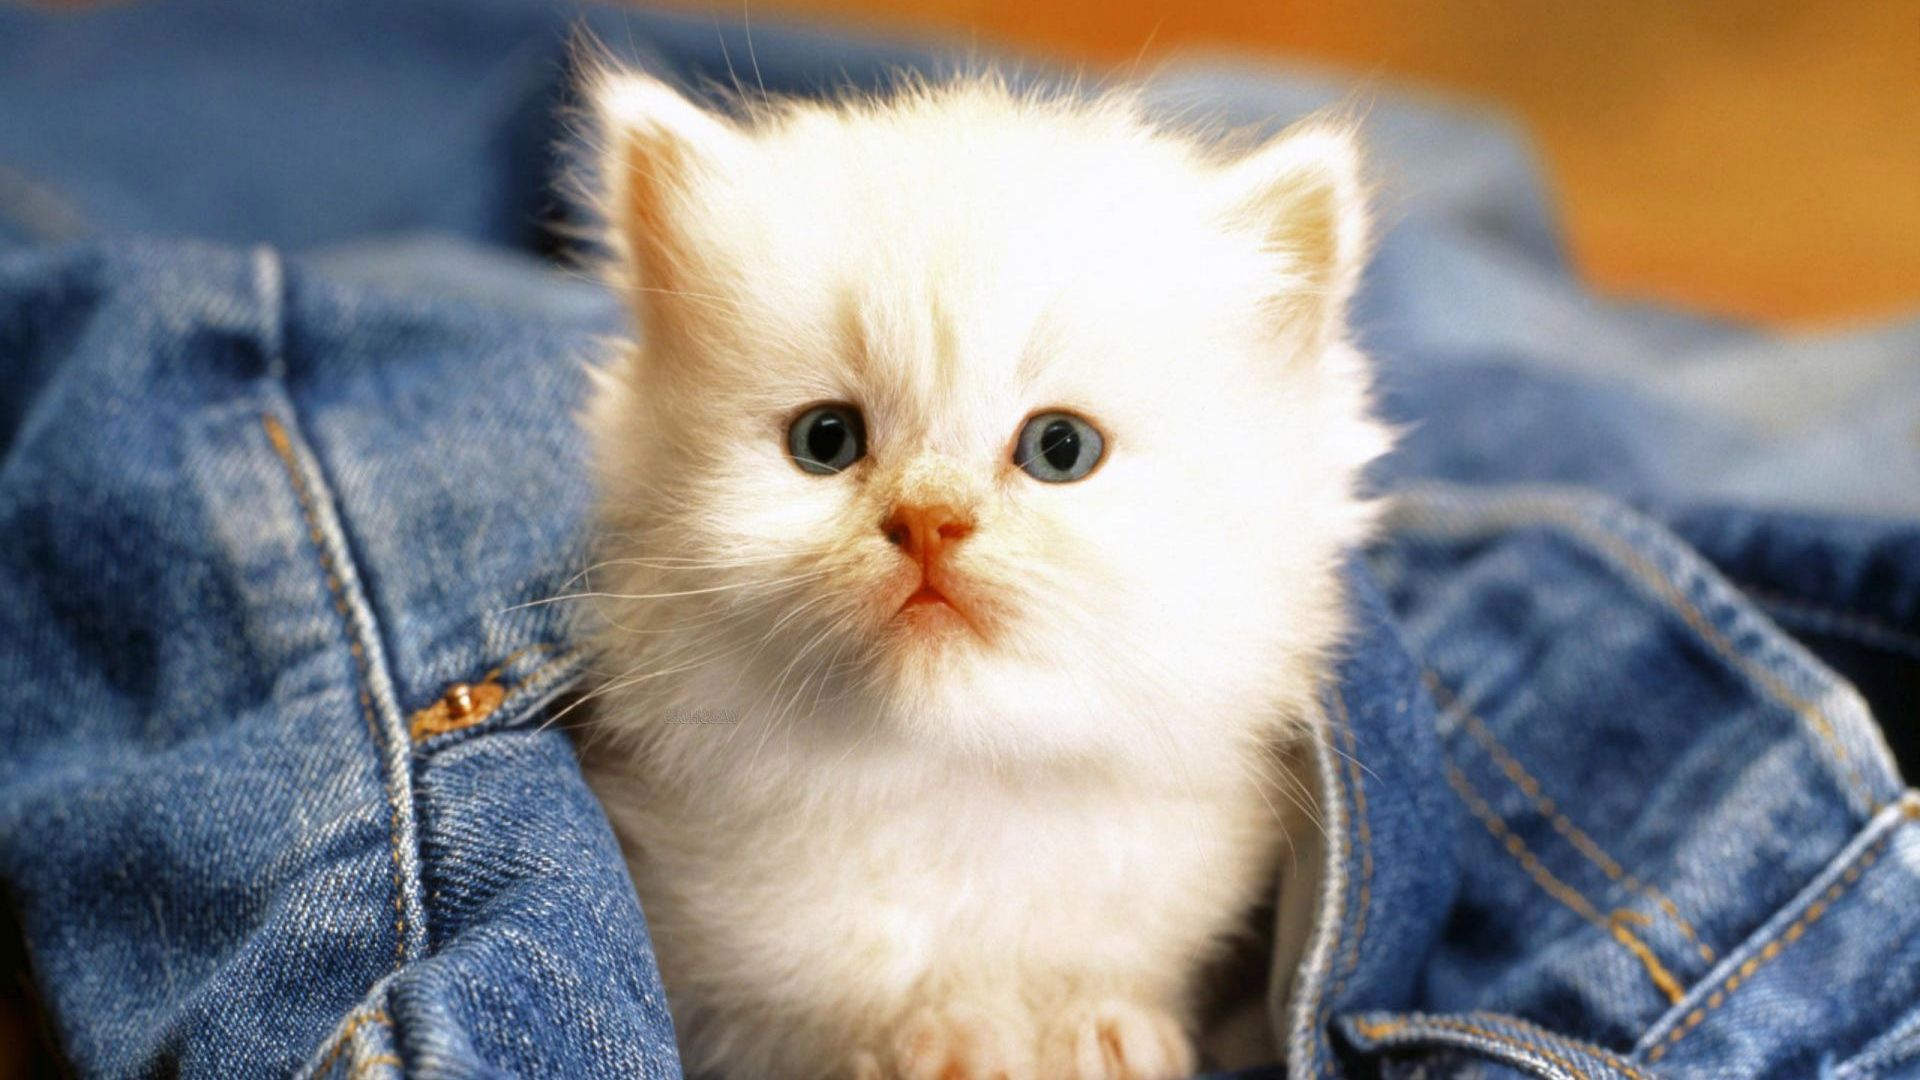 Cats Wallpaper Cute Cats And Kittens Wallpaper For Cat Image Download